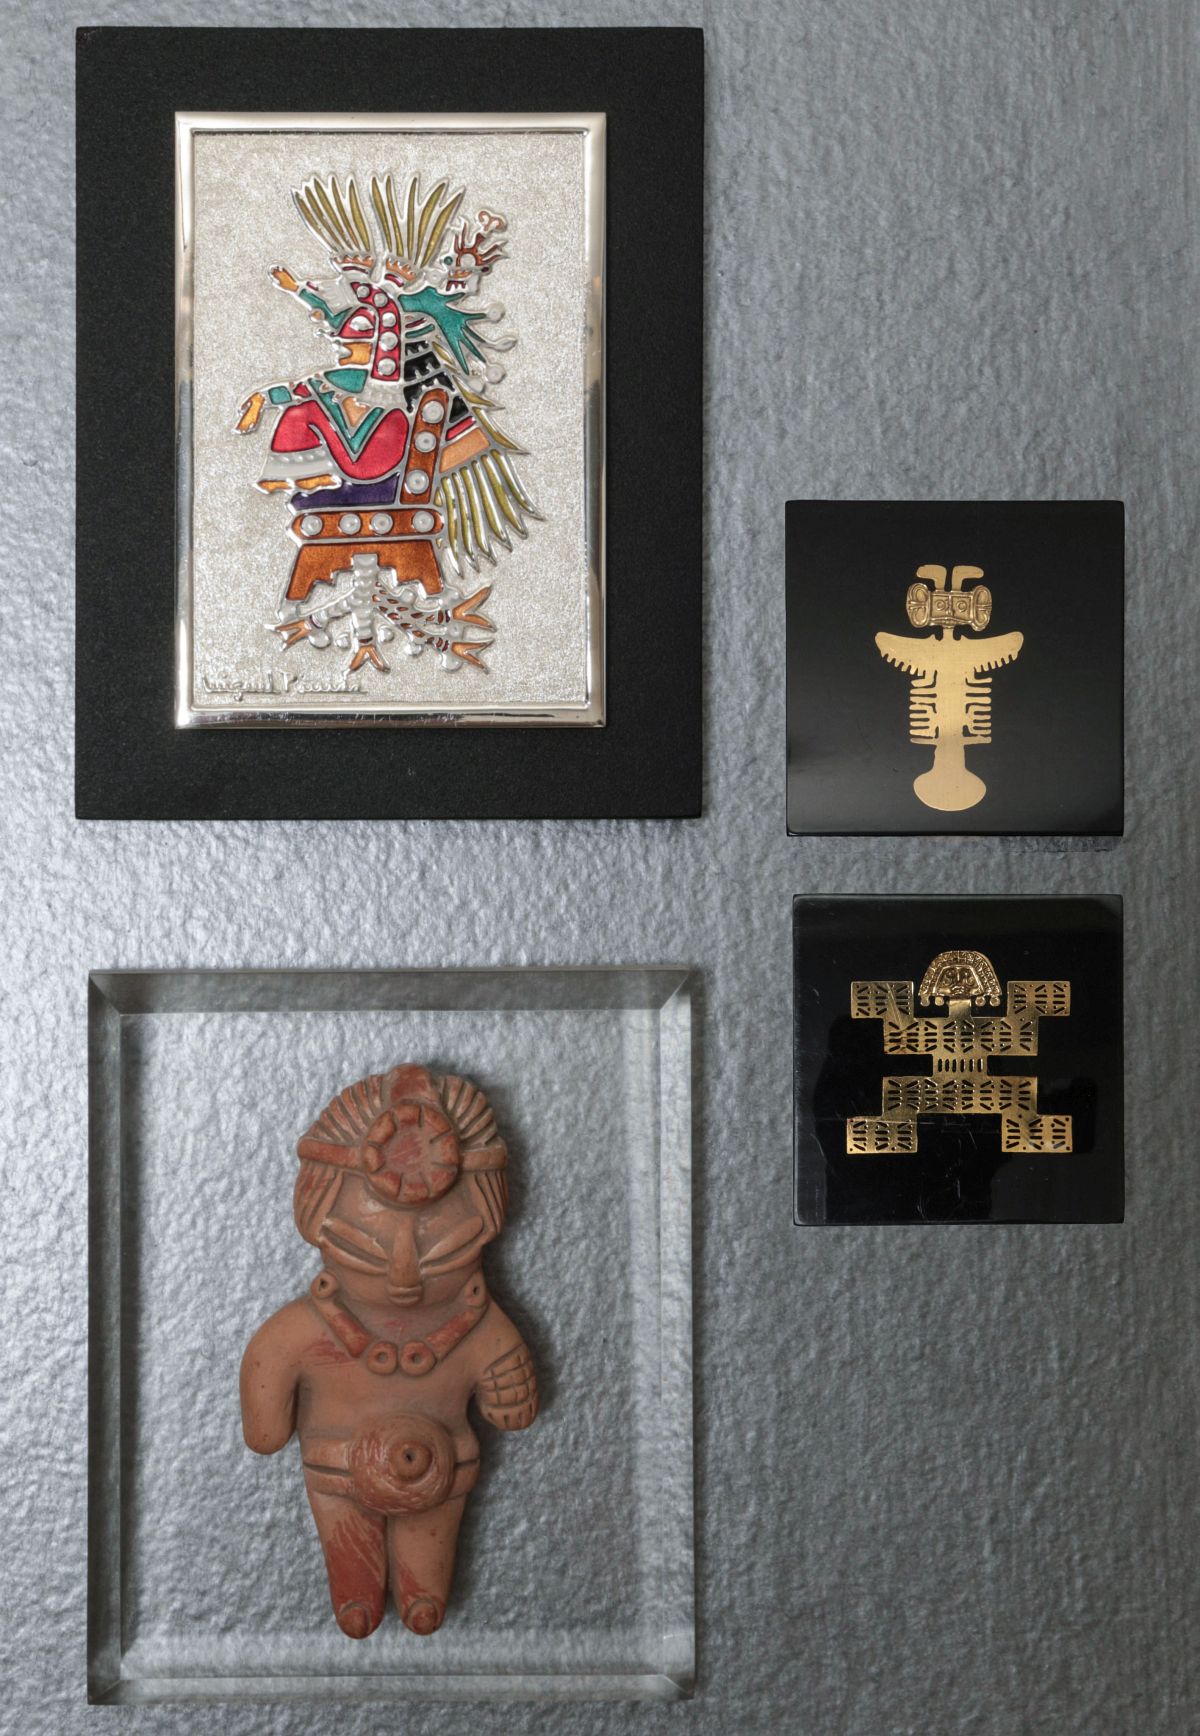 MIGUEL PINEDA AND OTHER DECORATIVE ARTS OBJECTS